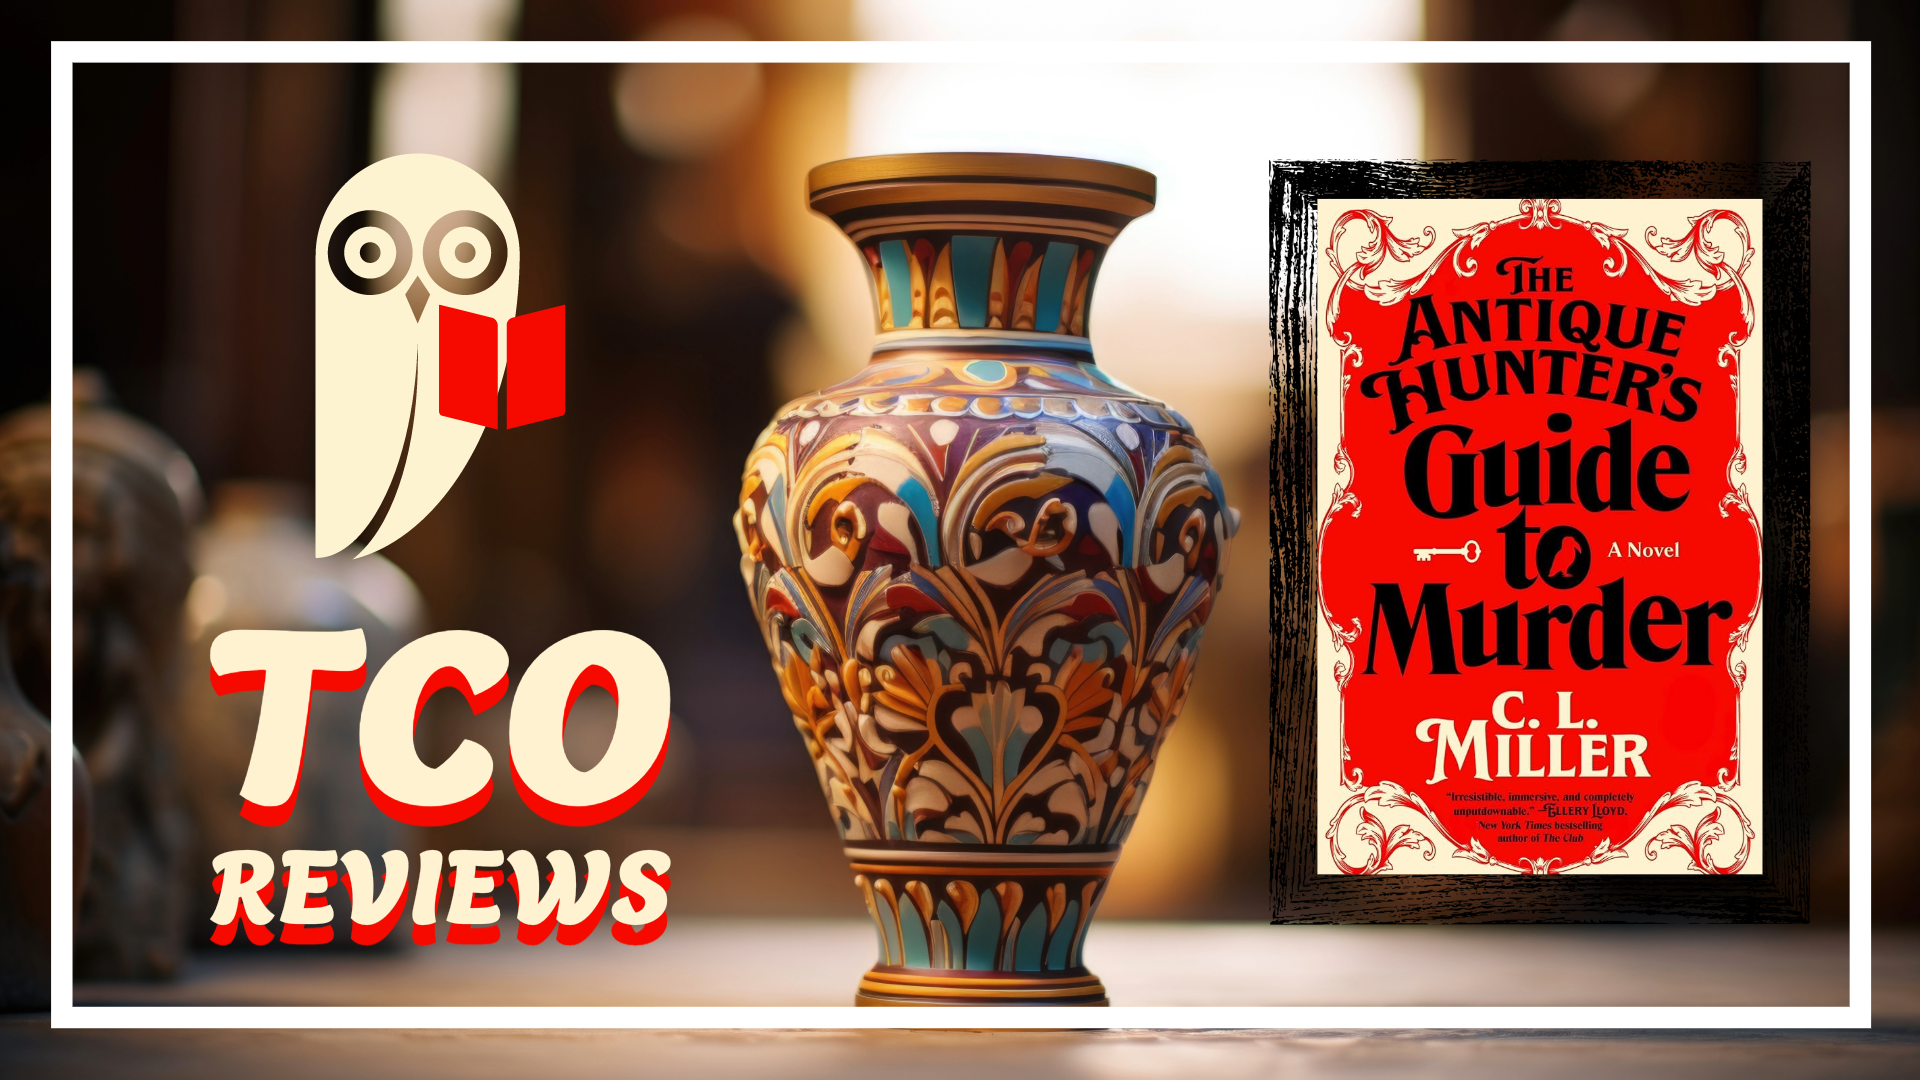 TCO Reviews: The Antique Hunter’s Guide to Murder by C.L. Miller